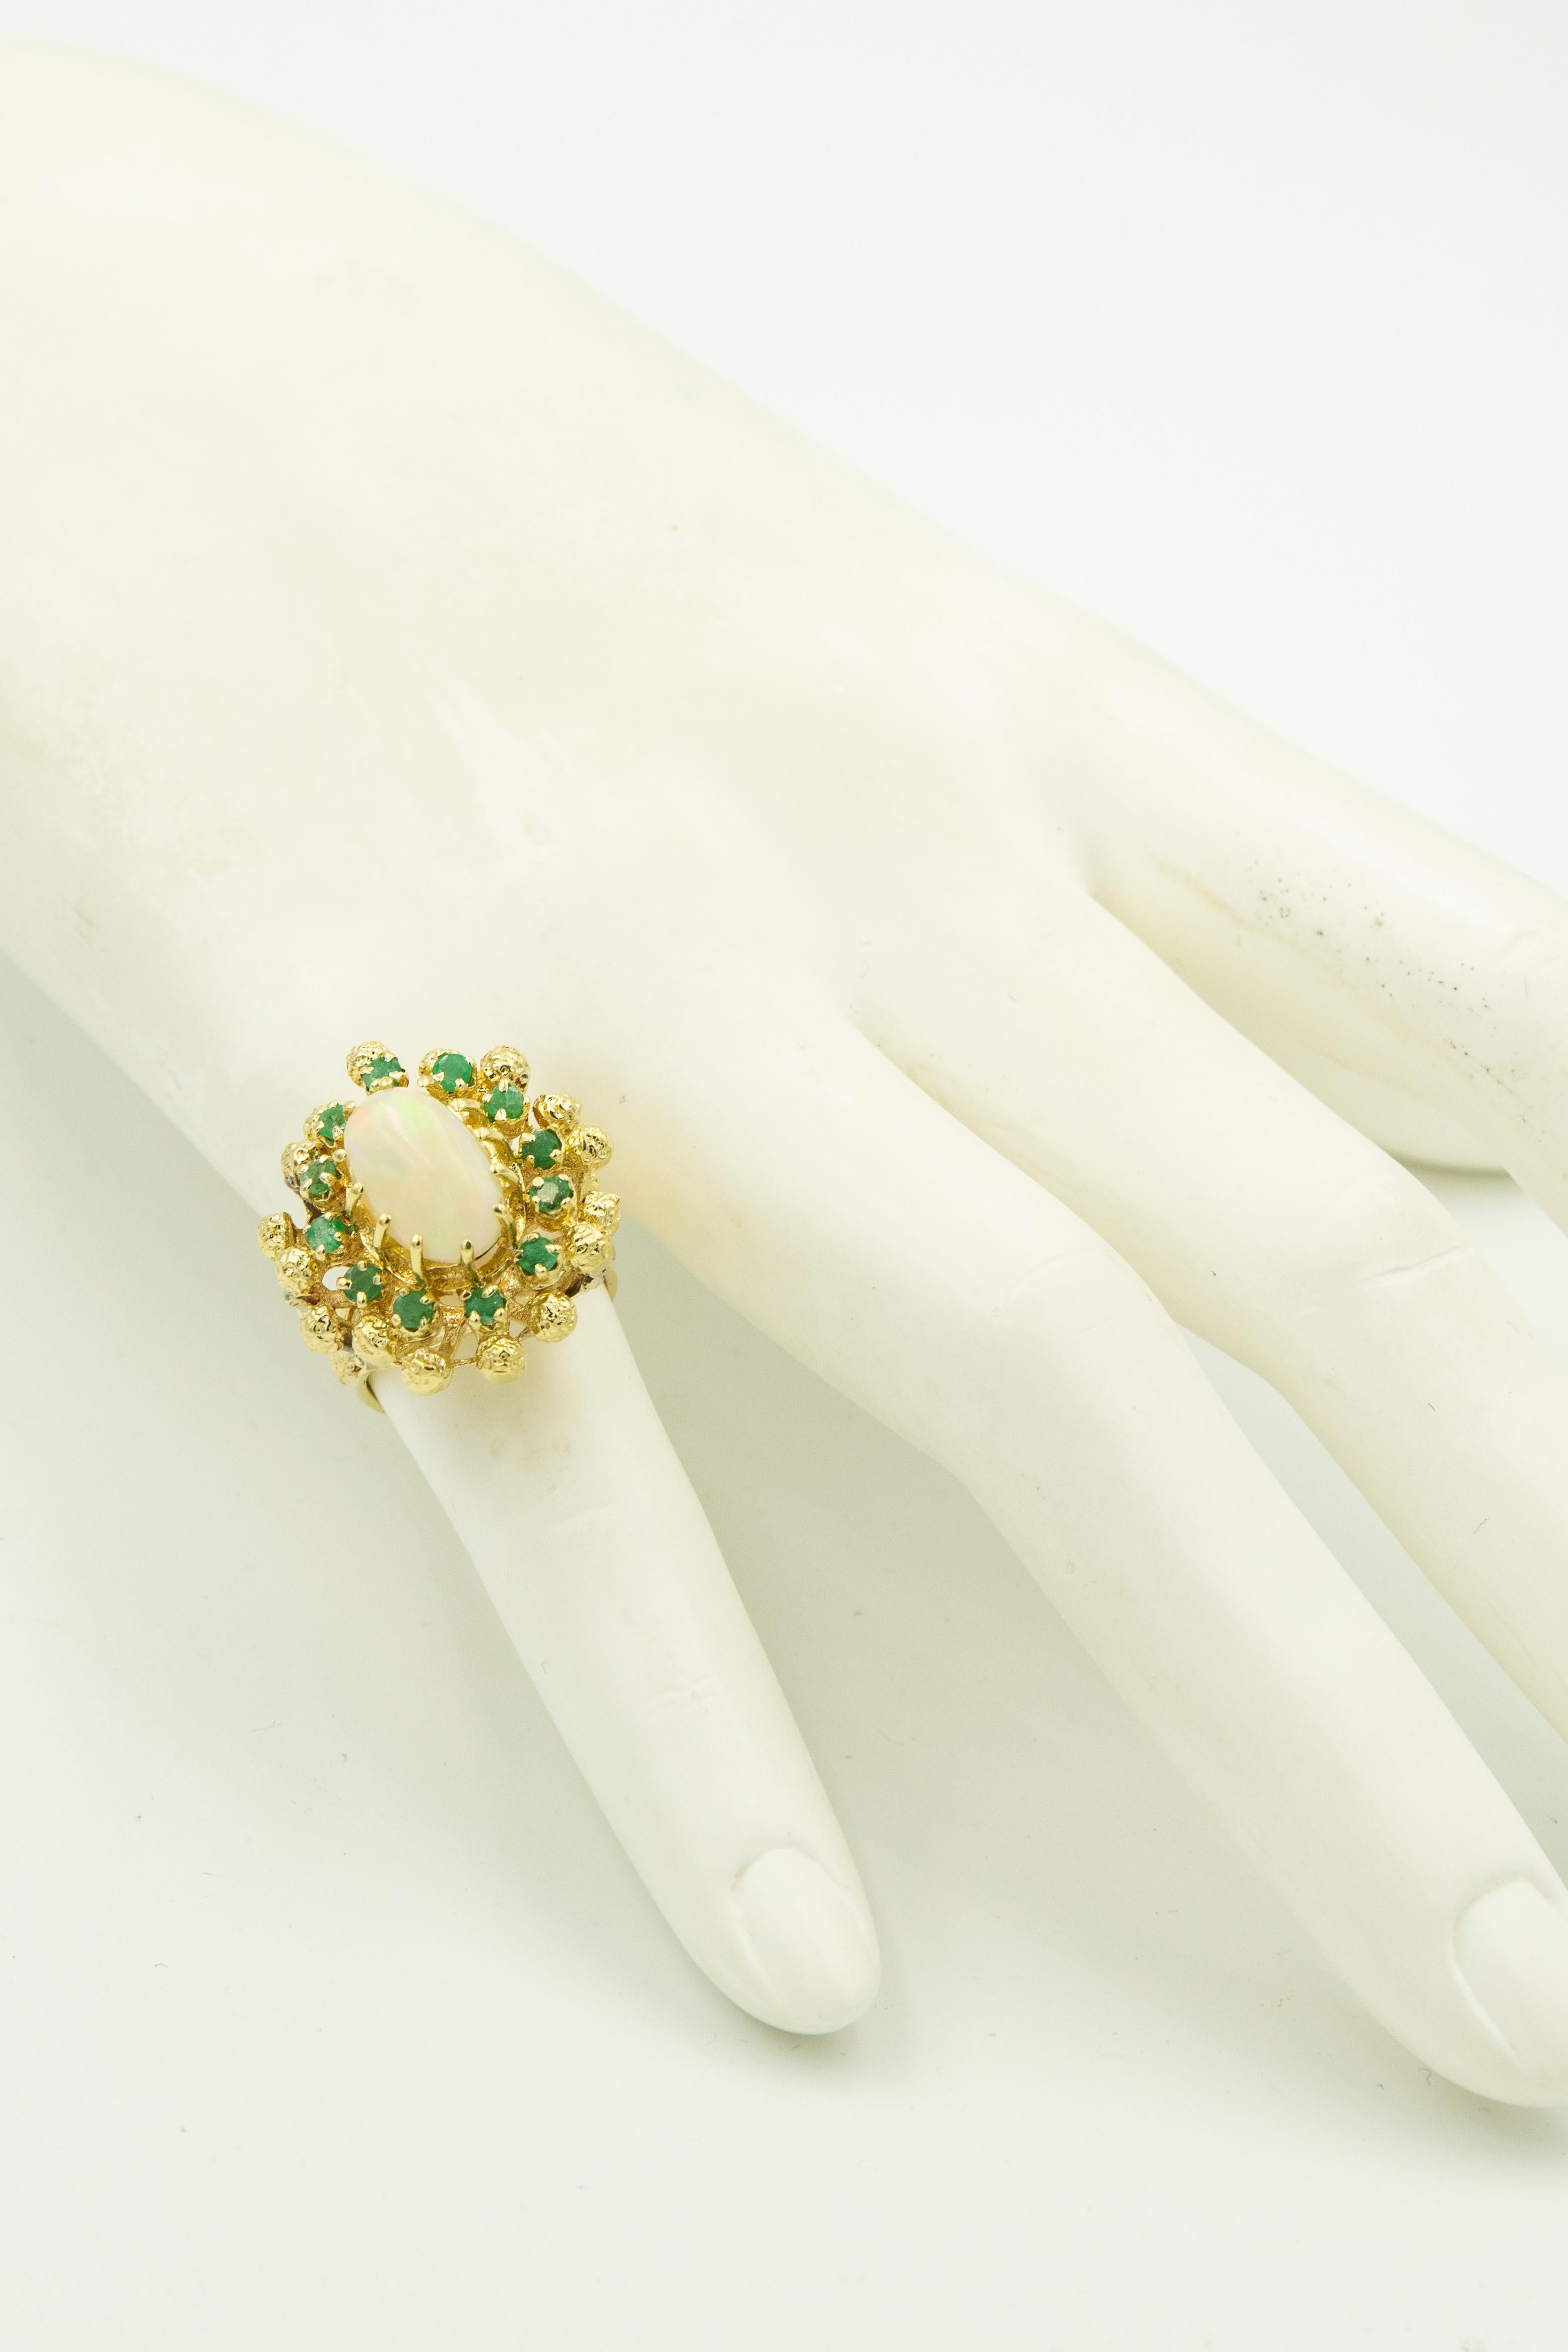 Women's Mid-20th Century Opal Emerald Textured Gold Ball Cluster Ring For Sale